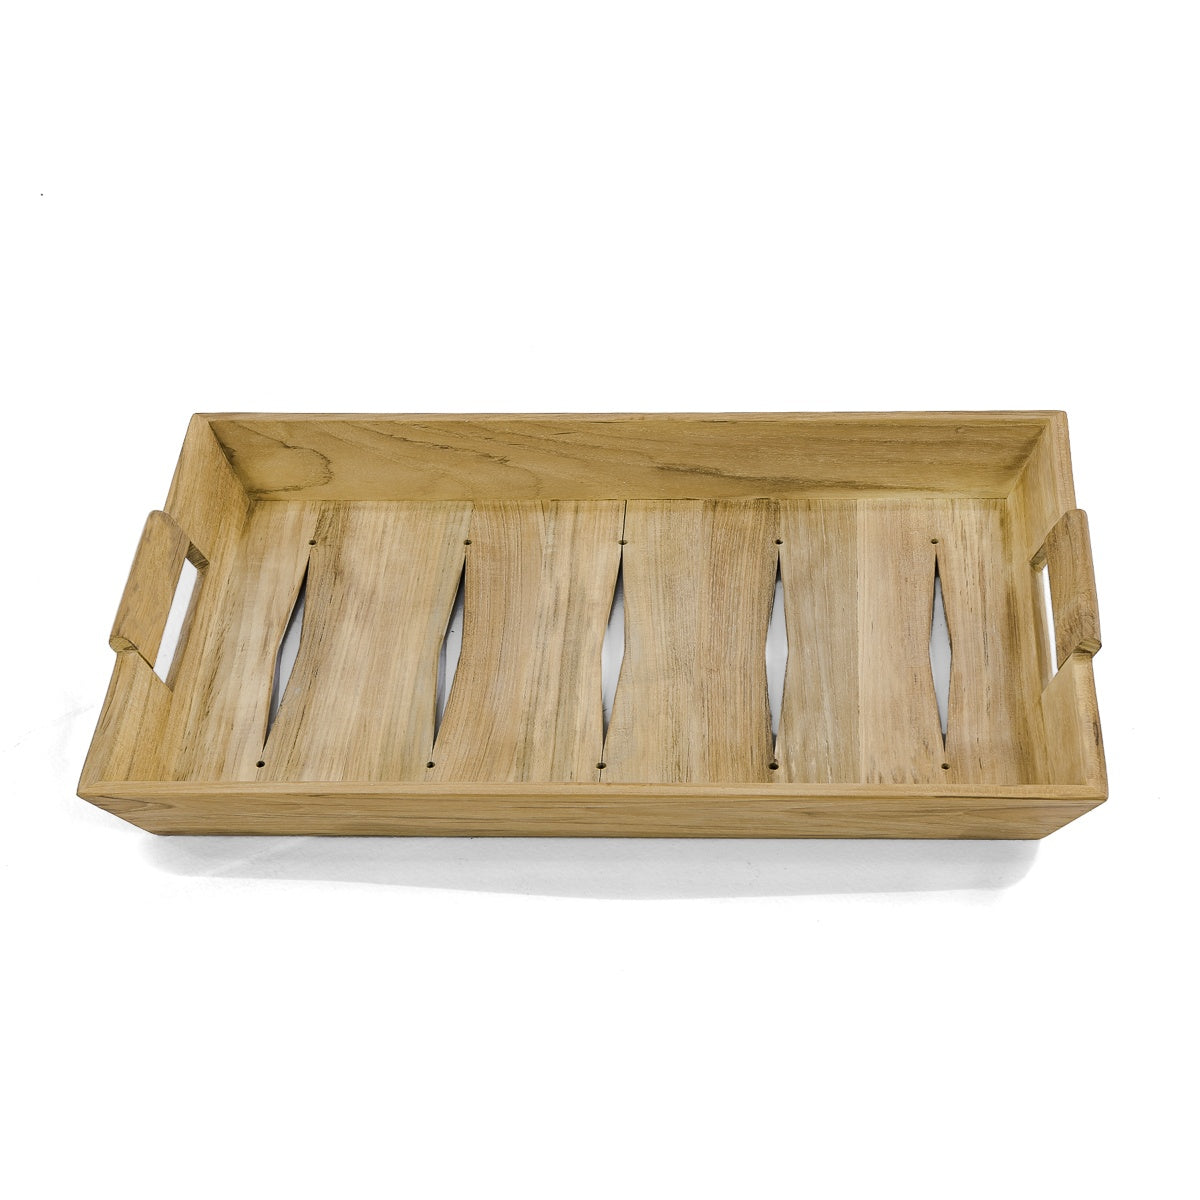 Westminster Teak - Butler Serving Tray 26 x 17.5 x 4 - 17440TO